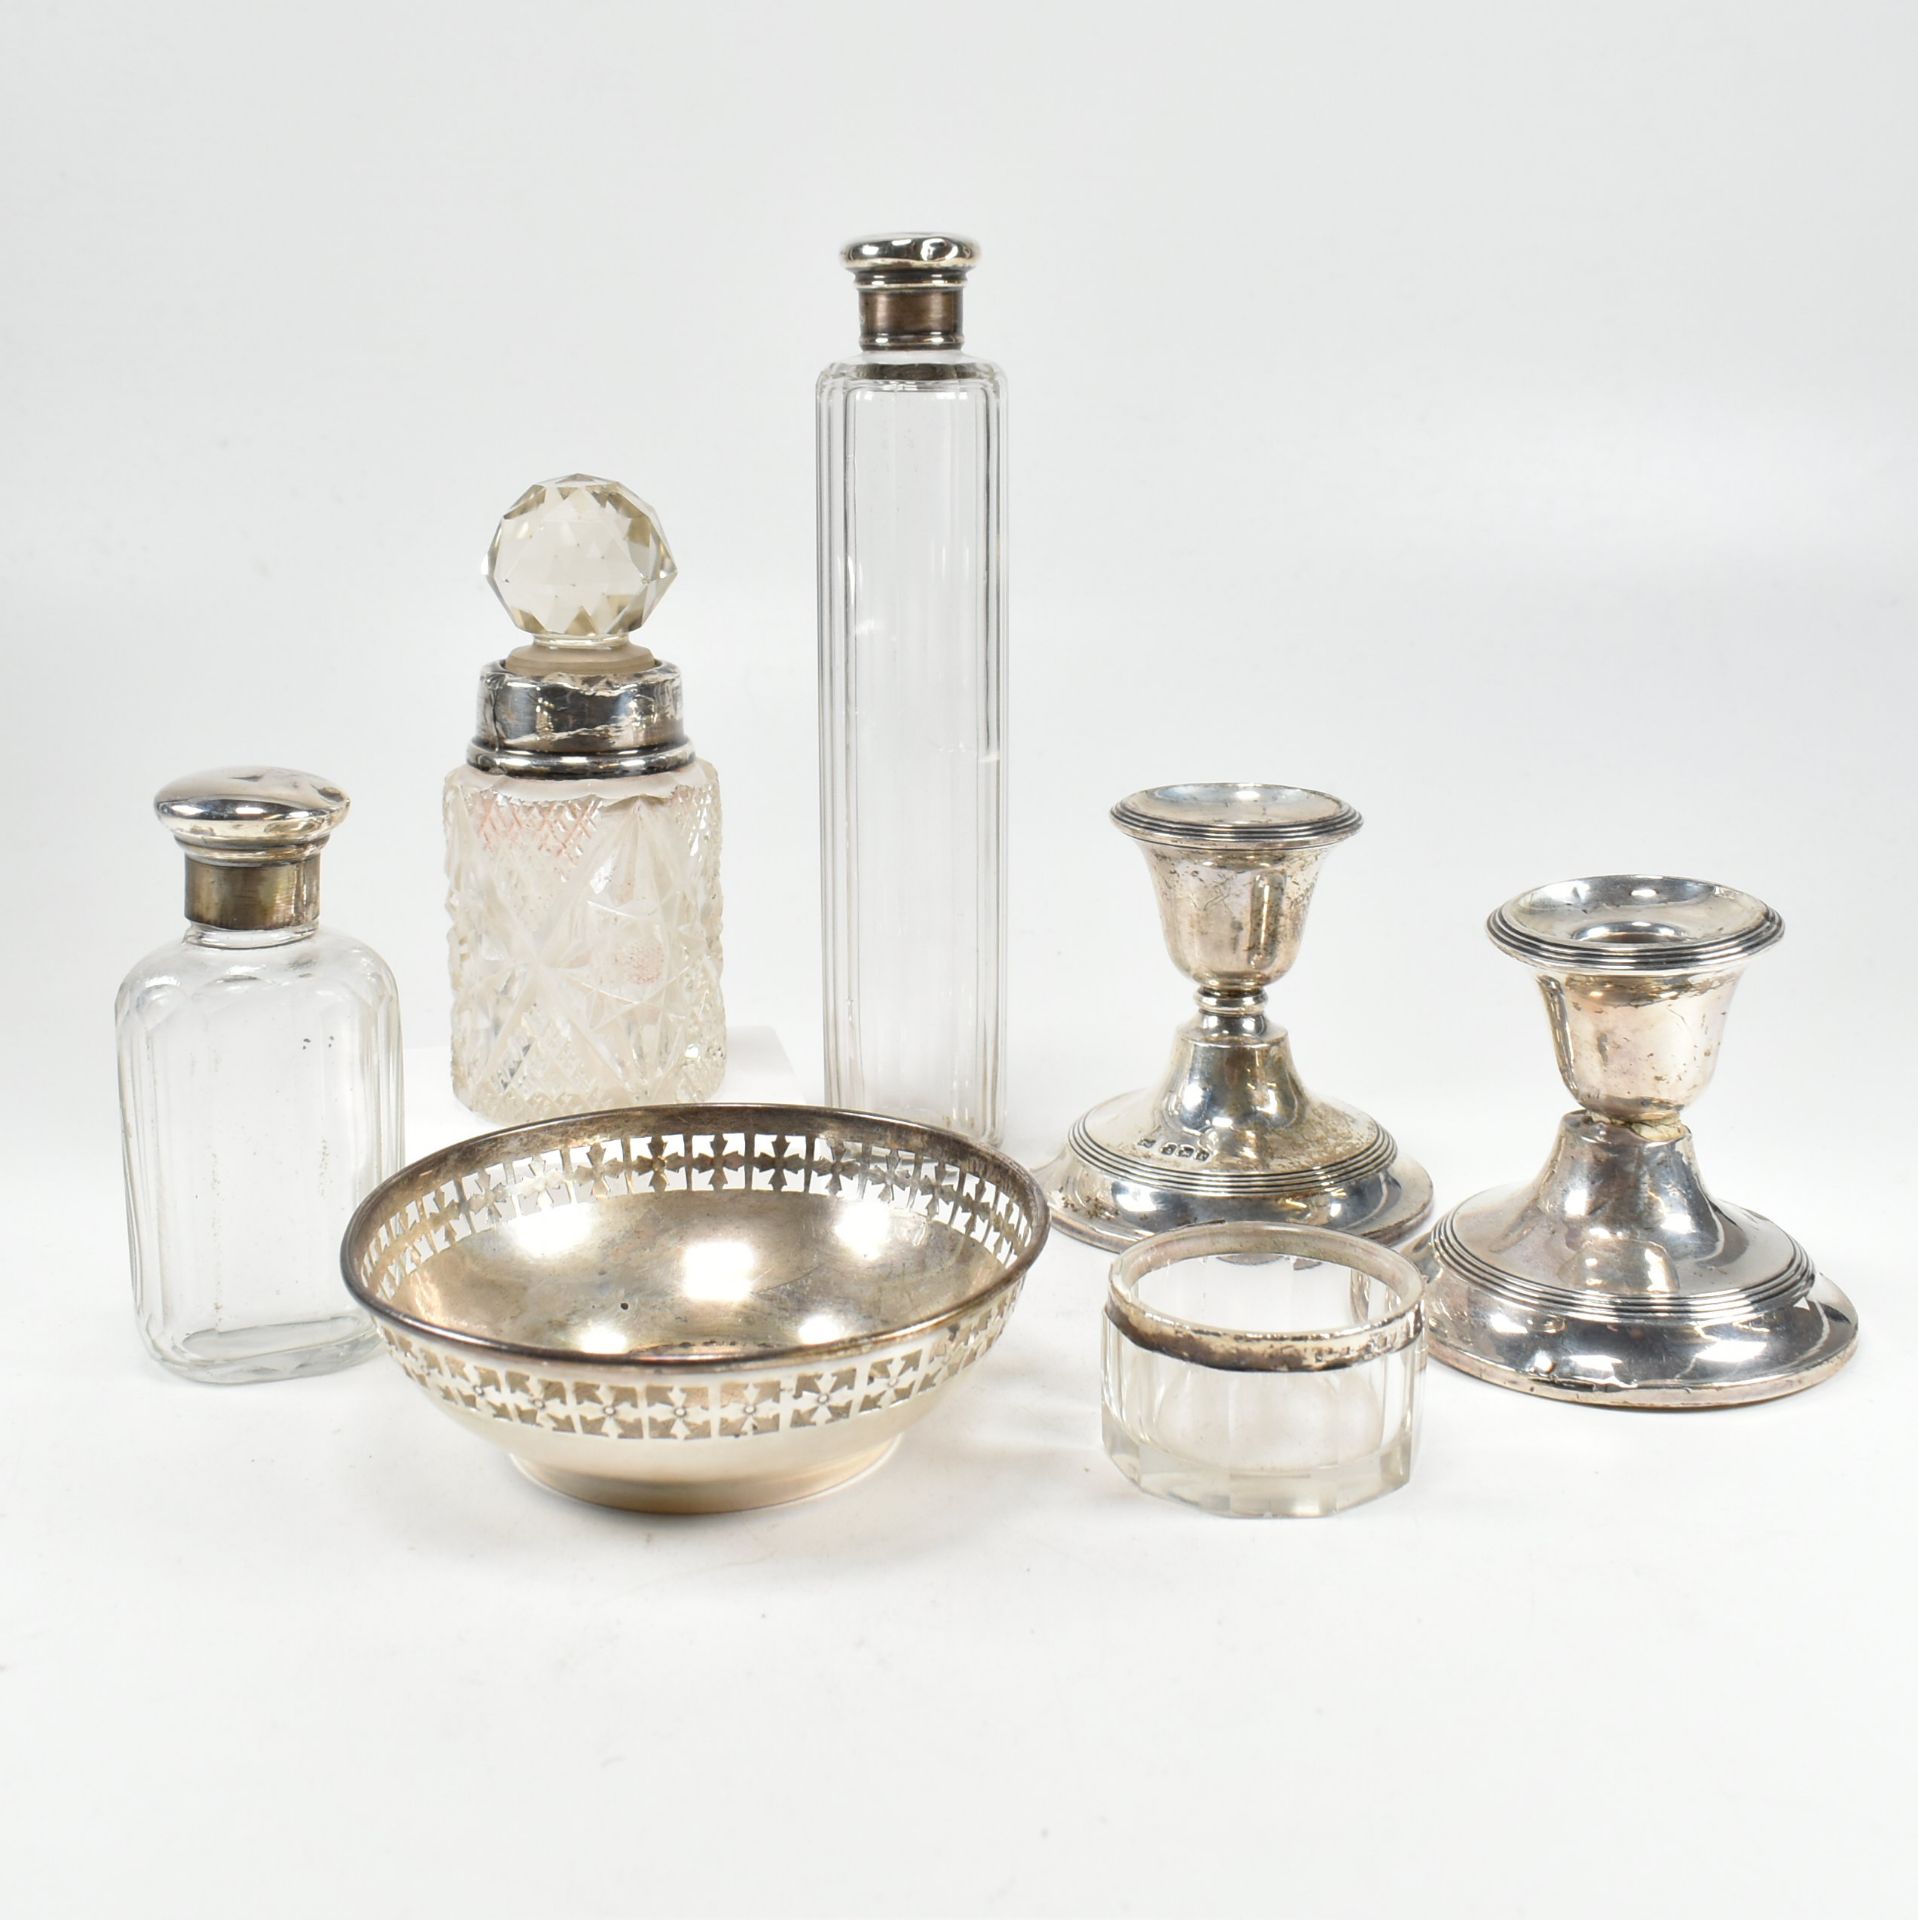 20TH CENTURY HALLMARKED SILVER & SILVER MOUNTED ITEMS - Image 3 of 8